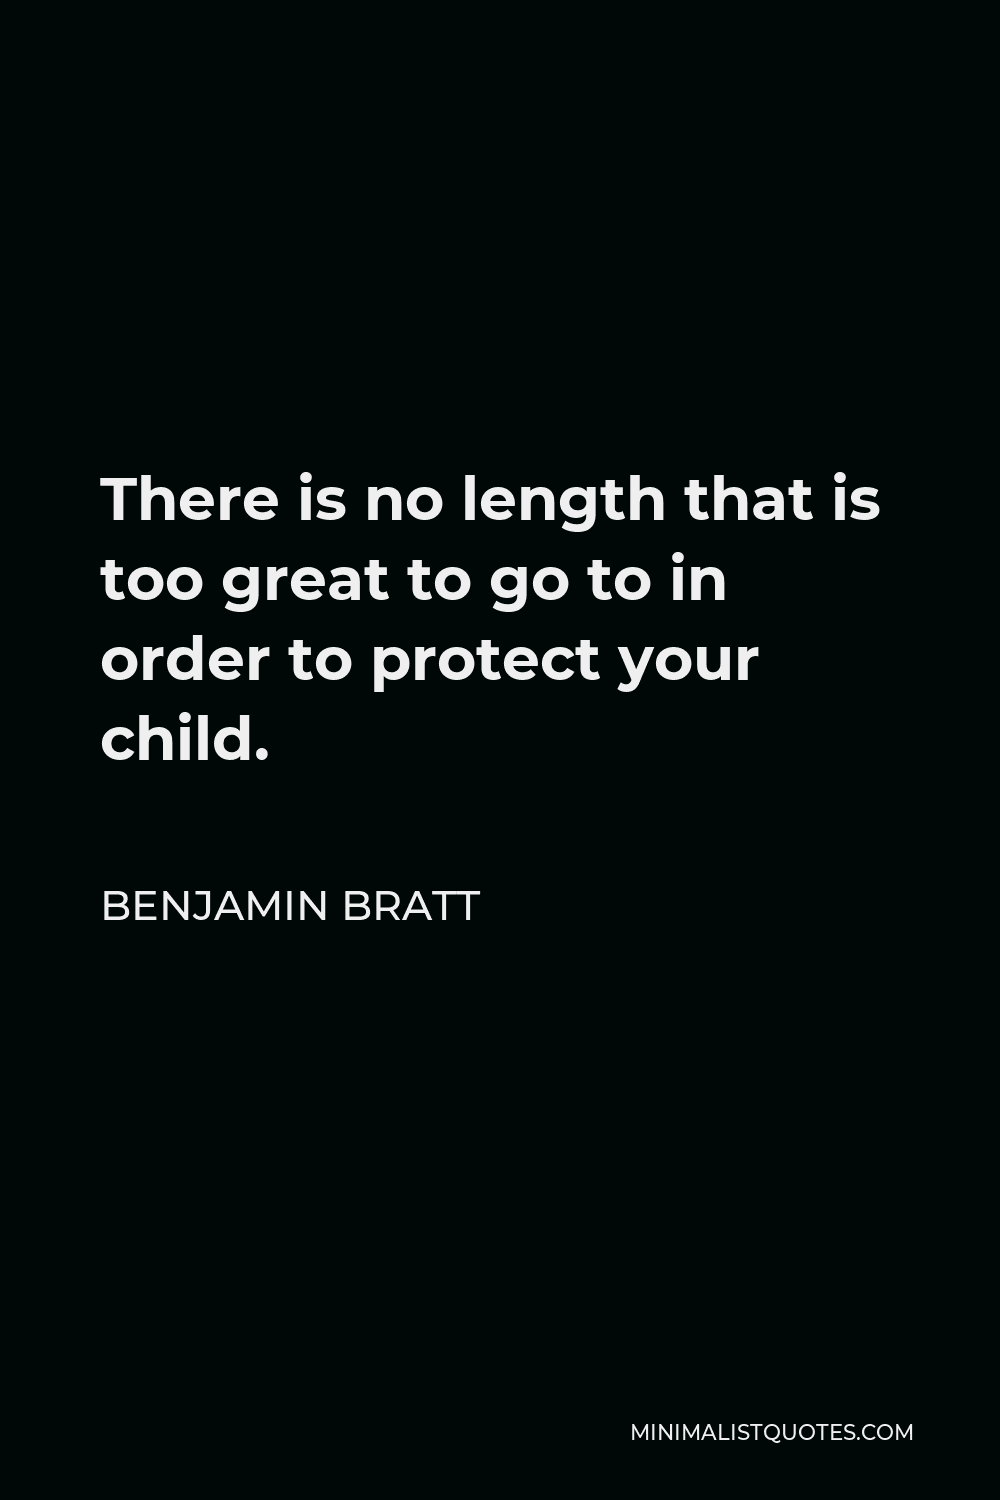 Benjamin Bratt Quote - There is no length that is too great to go to in order to protect your child.